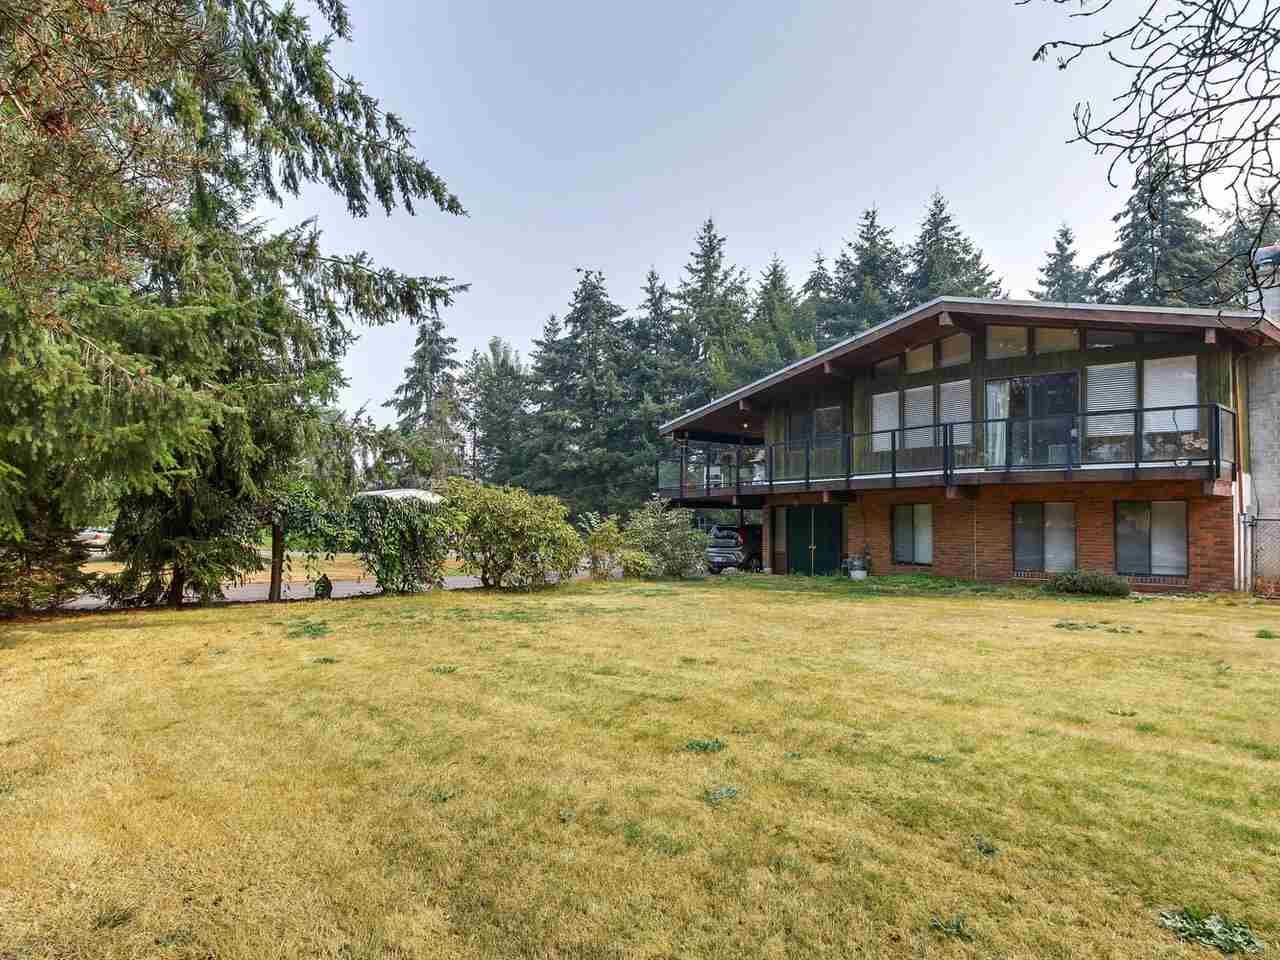 Main Photo: 2708 210 STREET in Langley: Campbell Valley House for sale : MLS®# R2298142